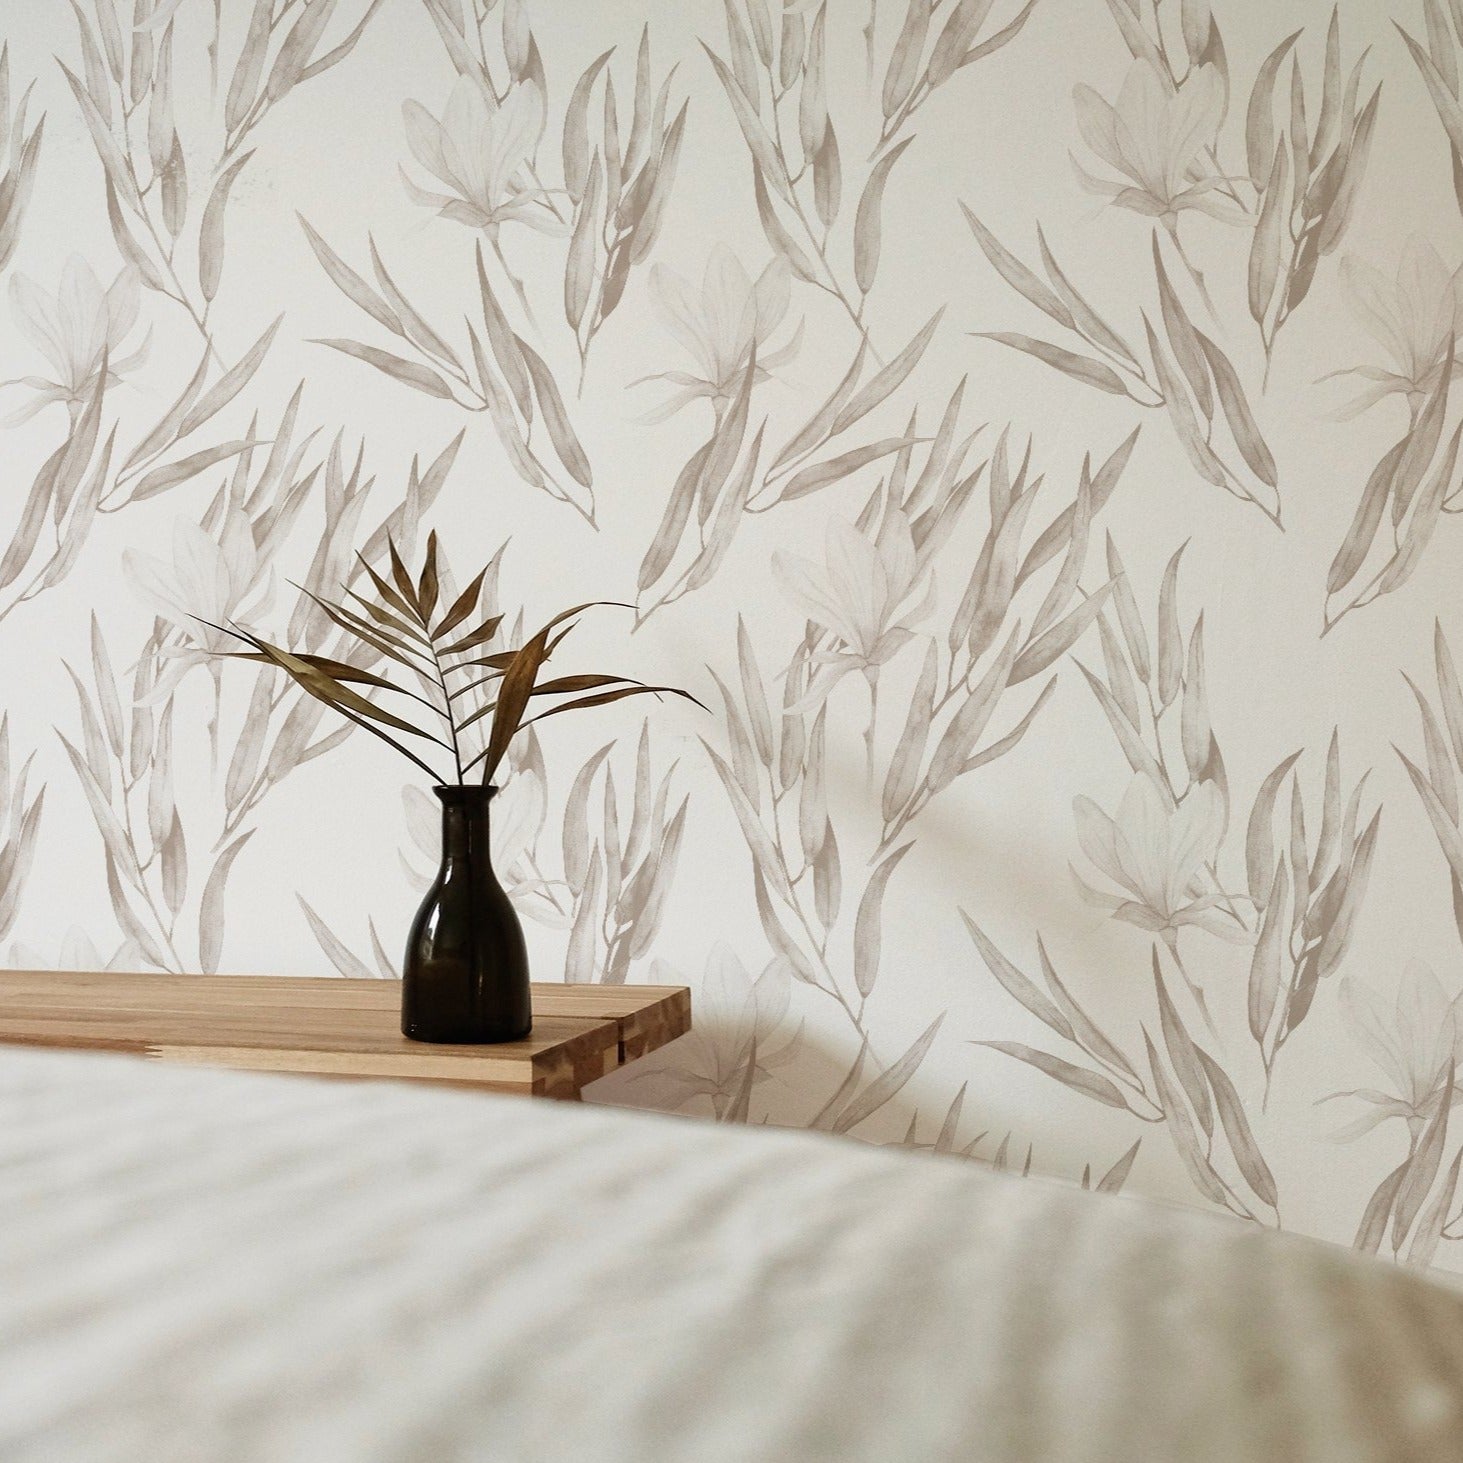 A serene bedroom decorated with wallpaper featuring soft watercolor illustrations of beige flowers and leaves. The space includes a wooden table with a dark vase holding dried foliage, enhancing the tranquil and elegant atmosphere.